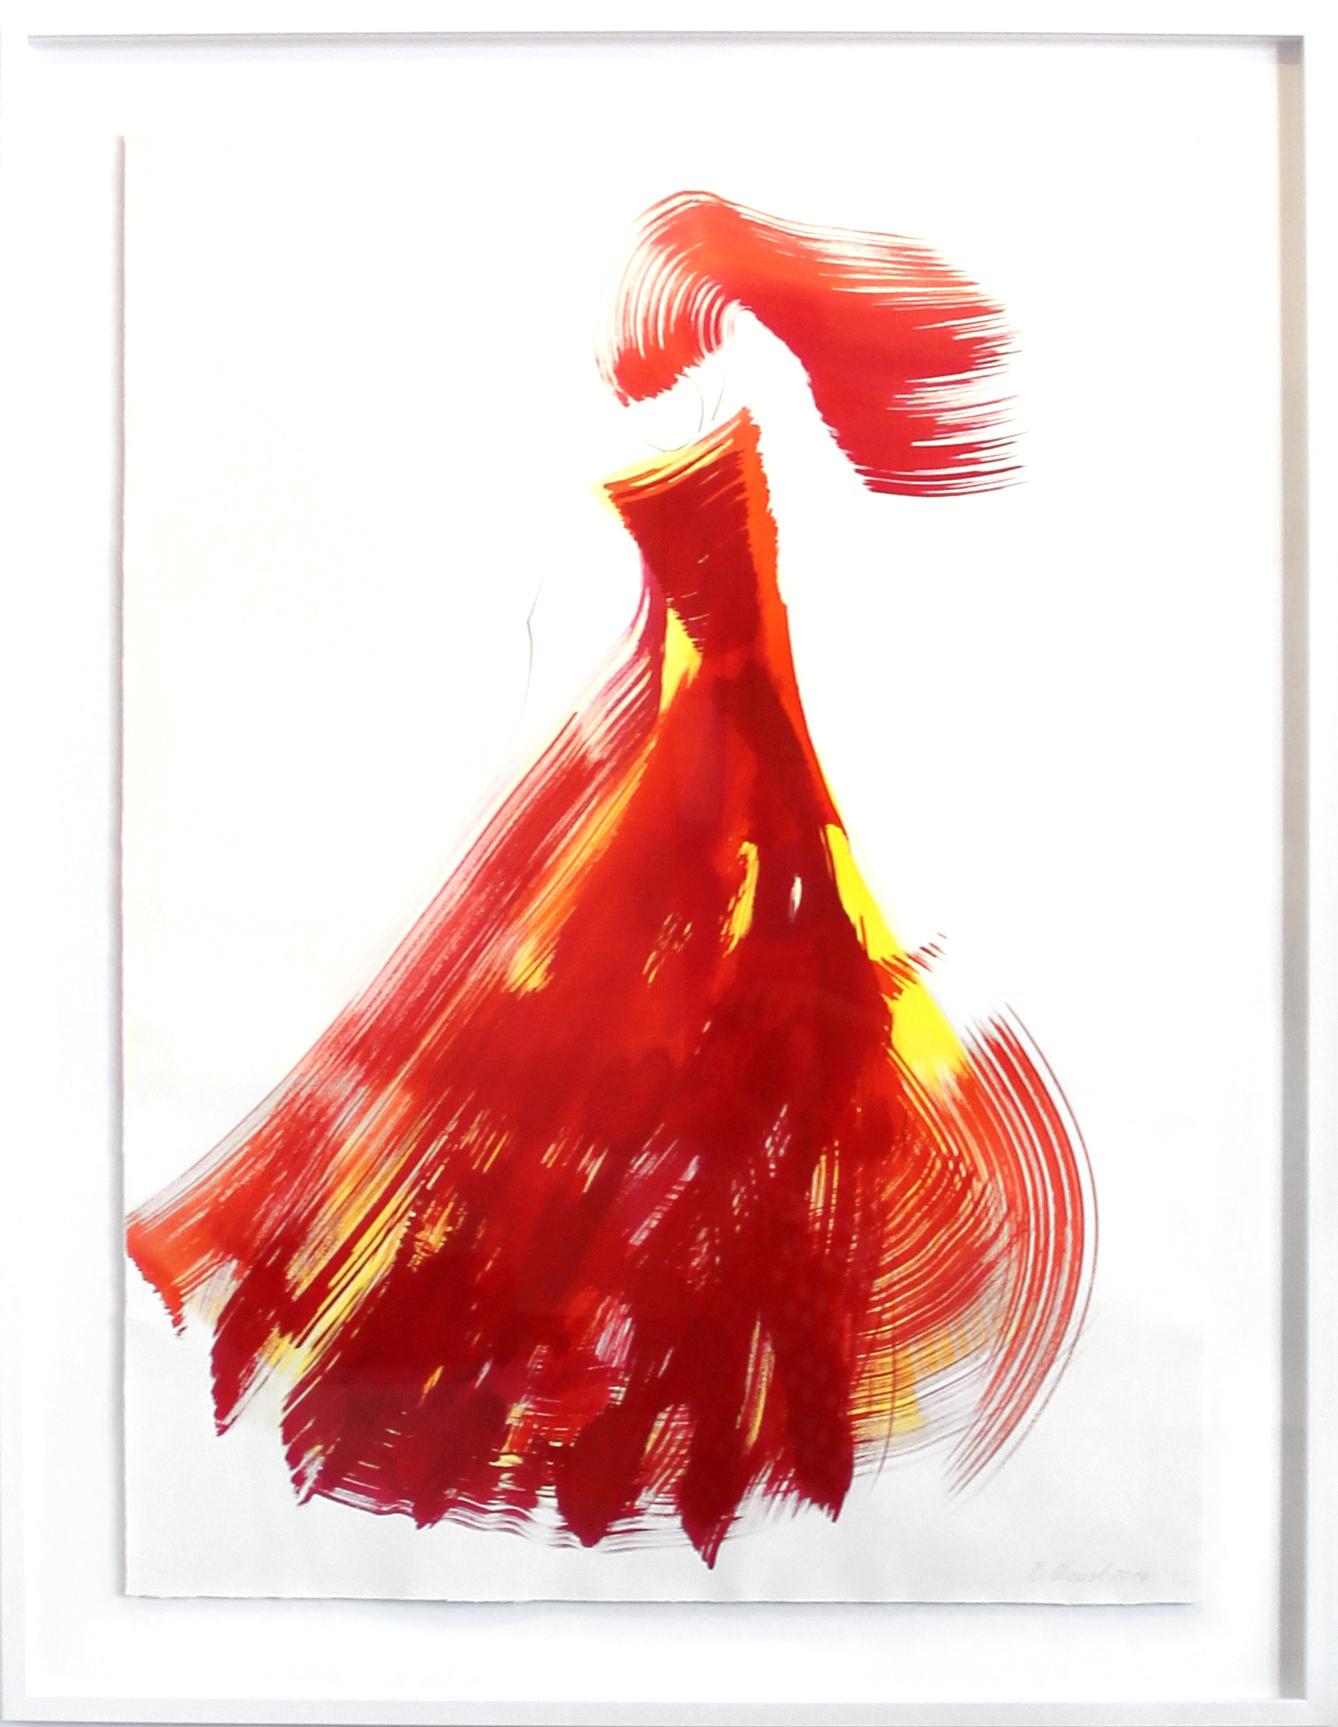 Bettina Mauel Abstract Painting - The Red Cloth 49 Original Framed Figurative Abstract Red Dress Painting on Paper